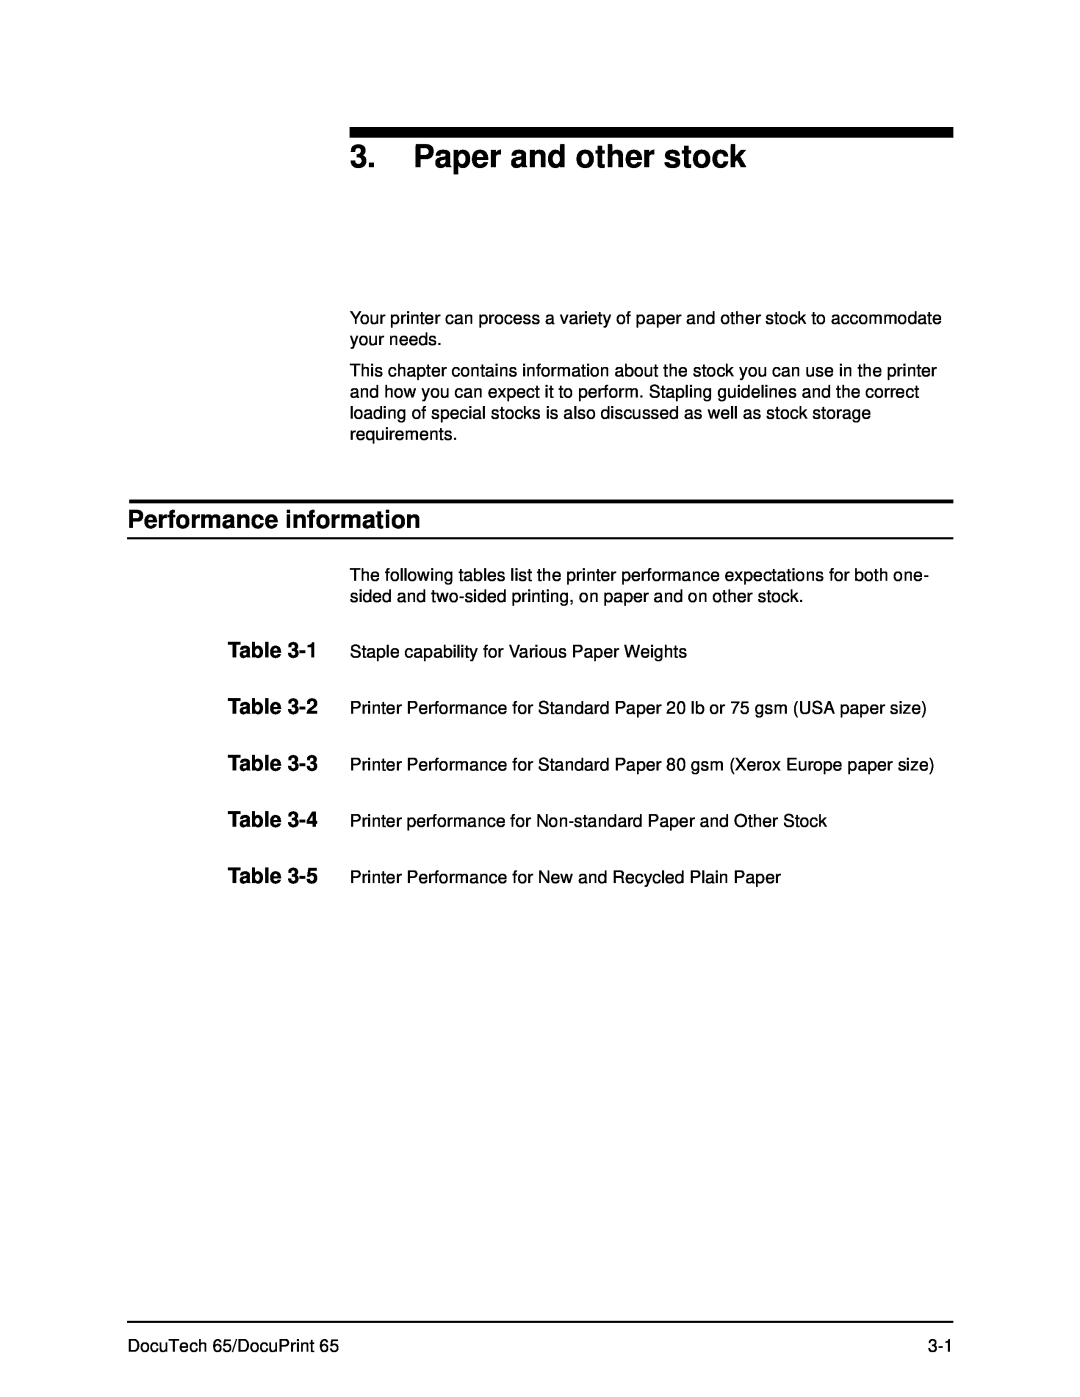 Xerox DOCUTECH 65 manual Paper and other stock, Performance information 